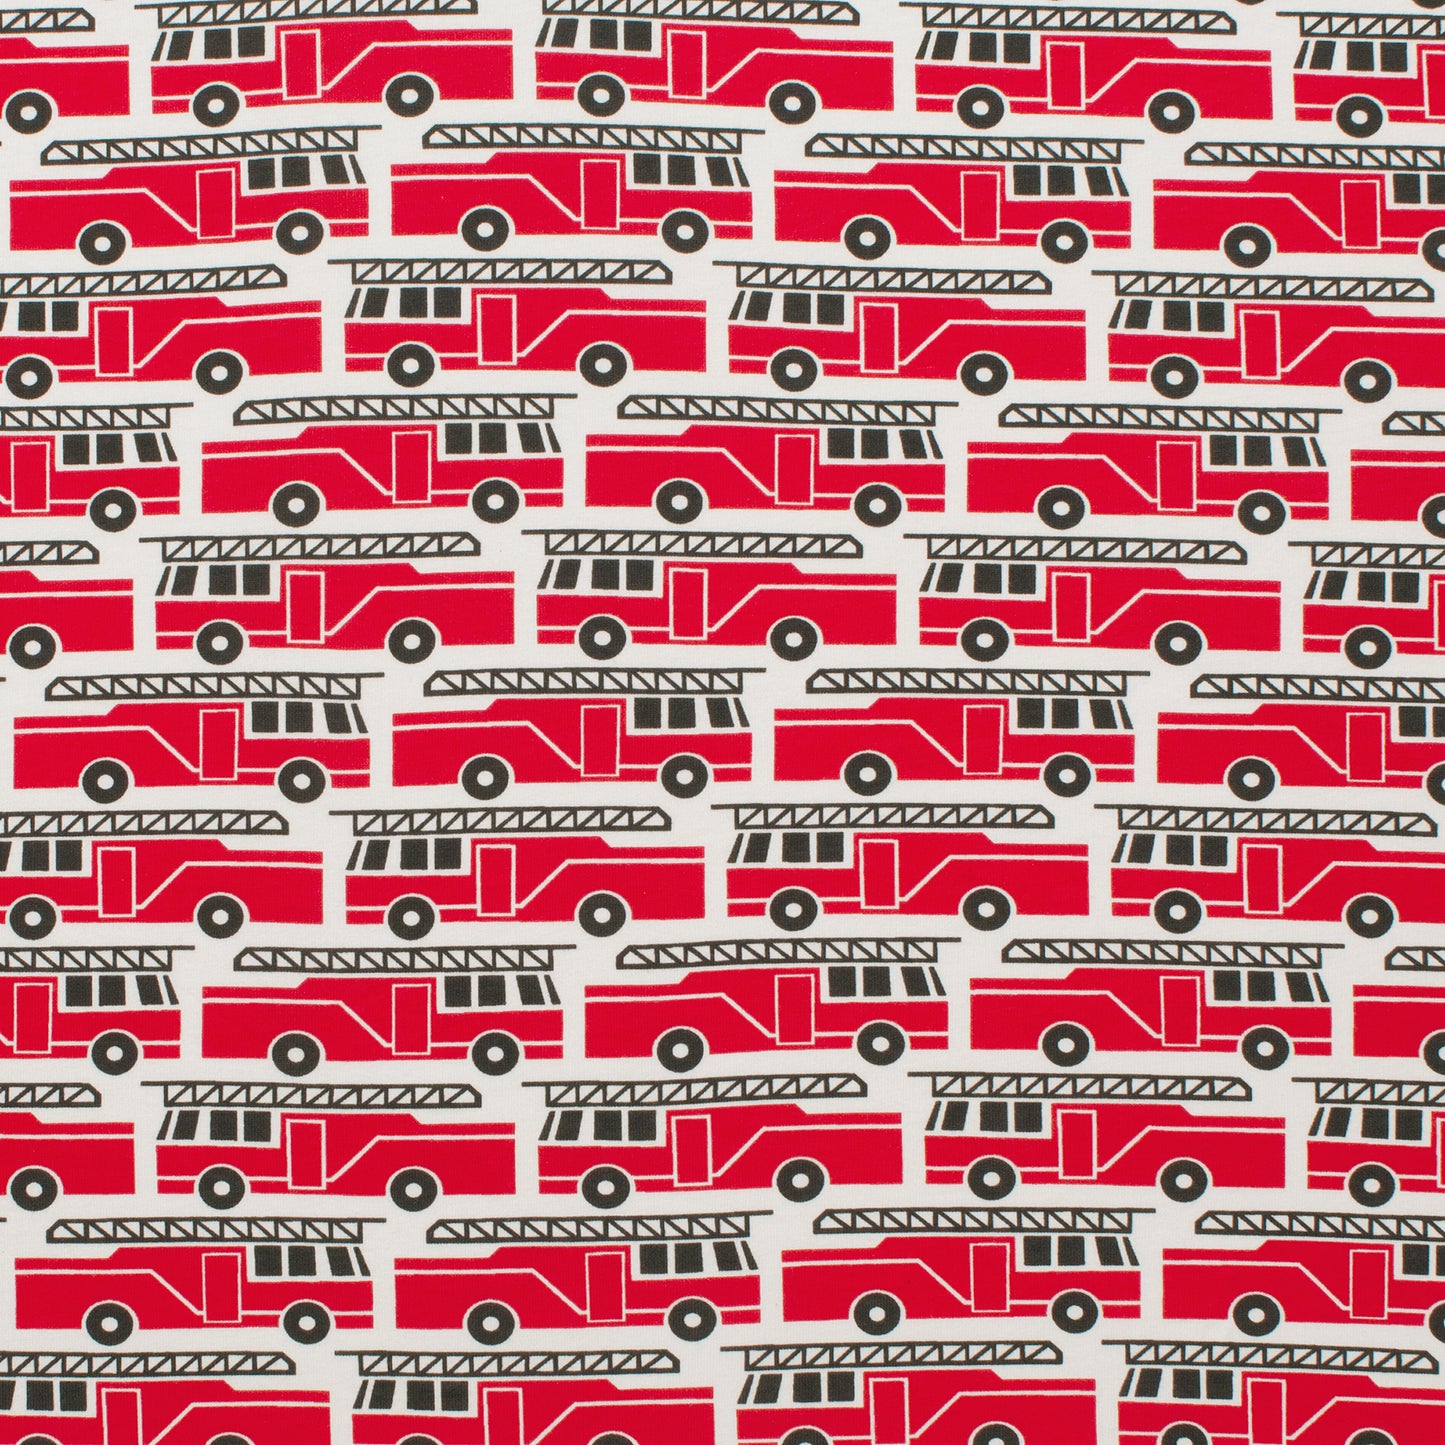 Footed Romper - Firetrucks Red